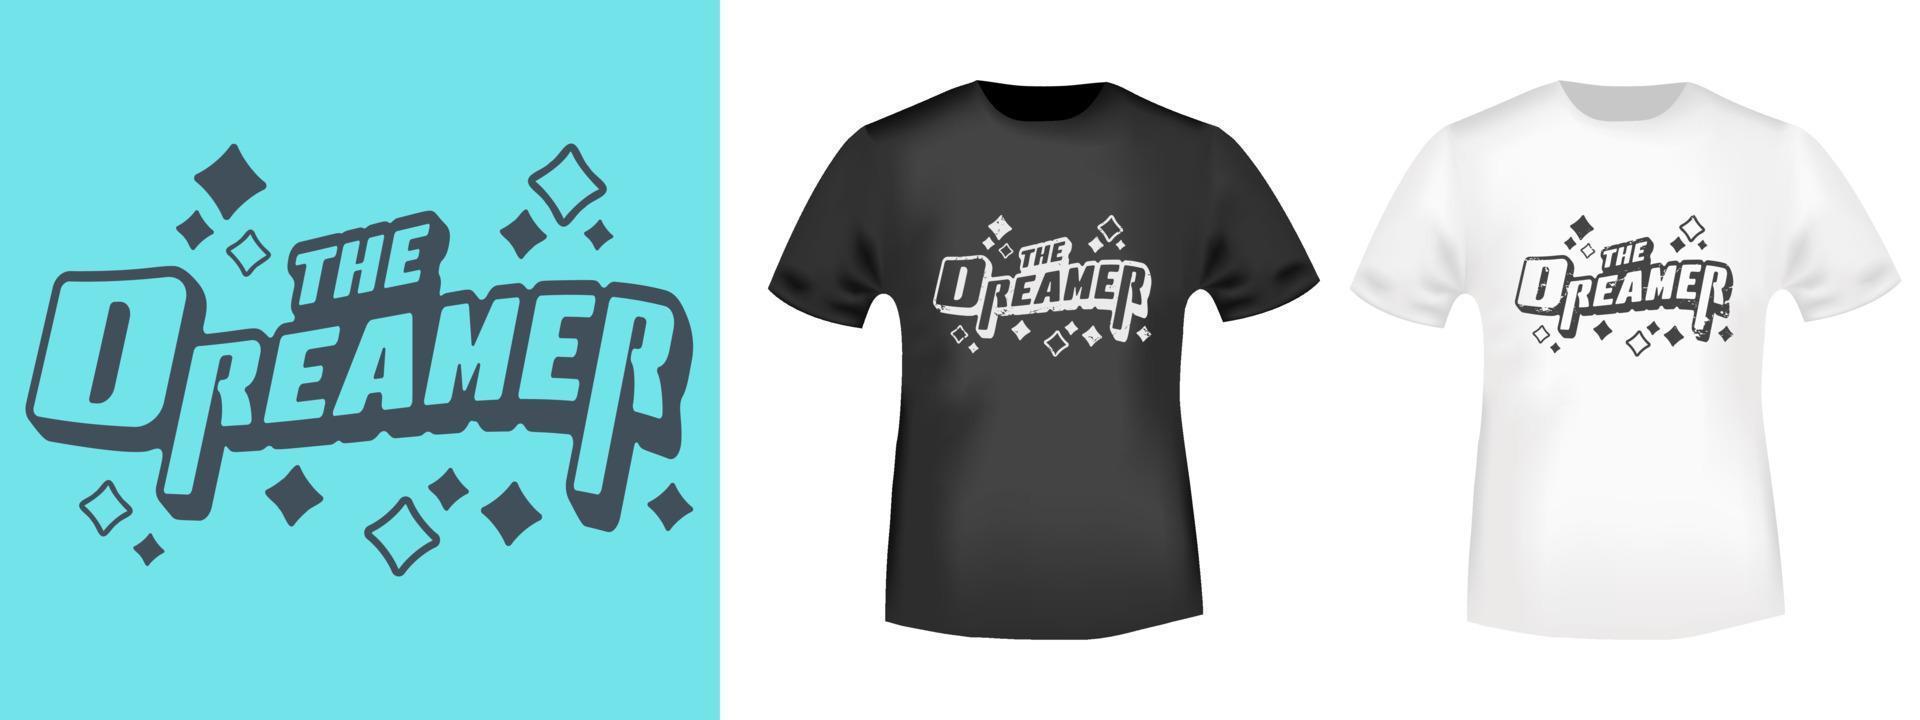 The Dreamer typography for t-shirt stamp, tee print, applique, badge, label clothing, or other printing product. Vector illustration.